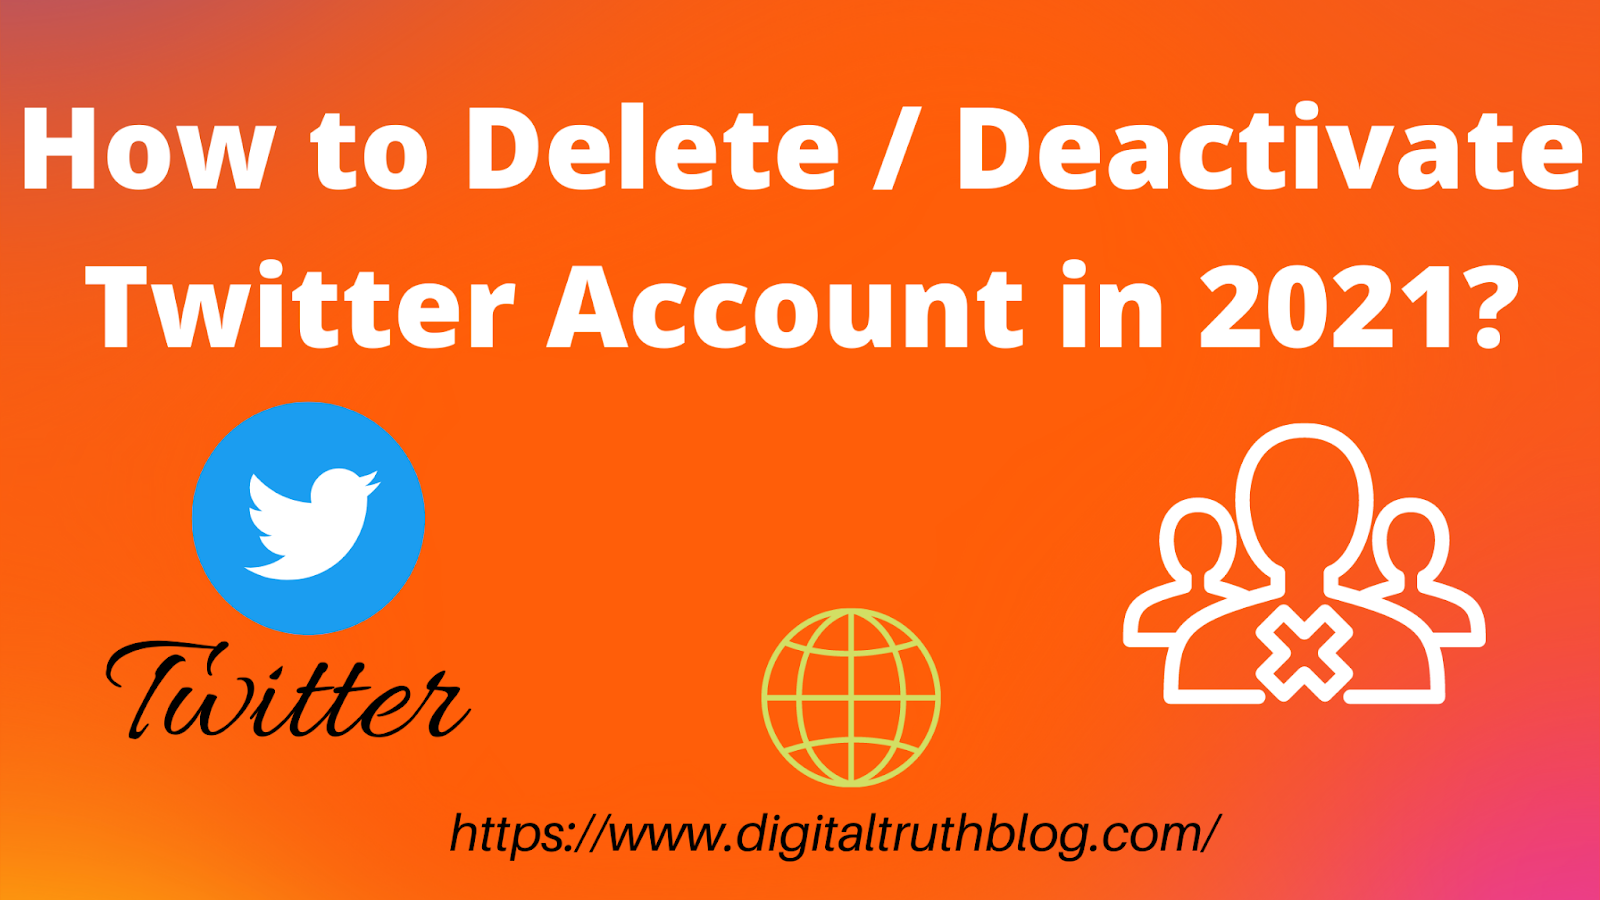 How to deactivate the Twitter account in 2022?